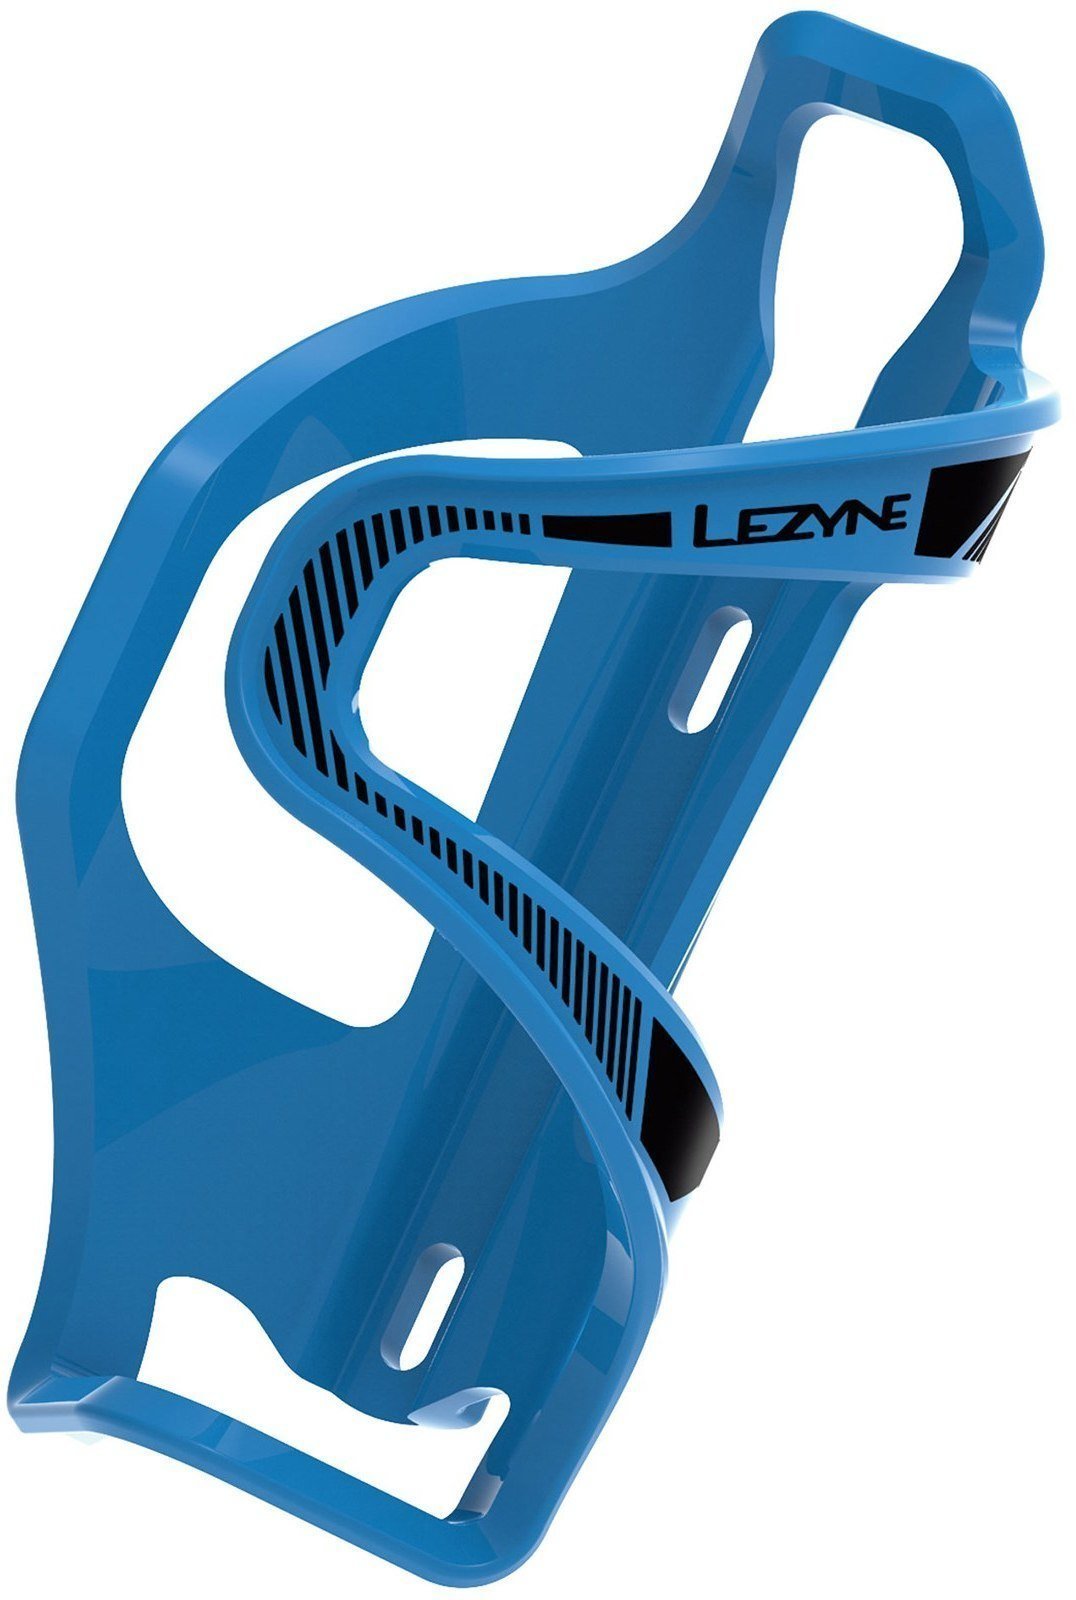 Photos - Bicycle Parts Lezyne Flow Cage SL L Blue Bicycle Bottle Holder 1-BC-FLSLL-V210 